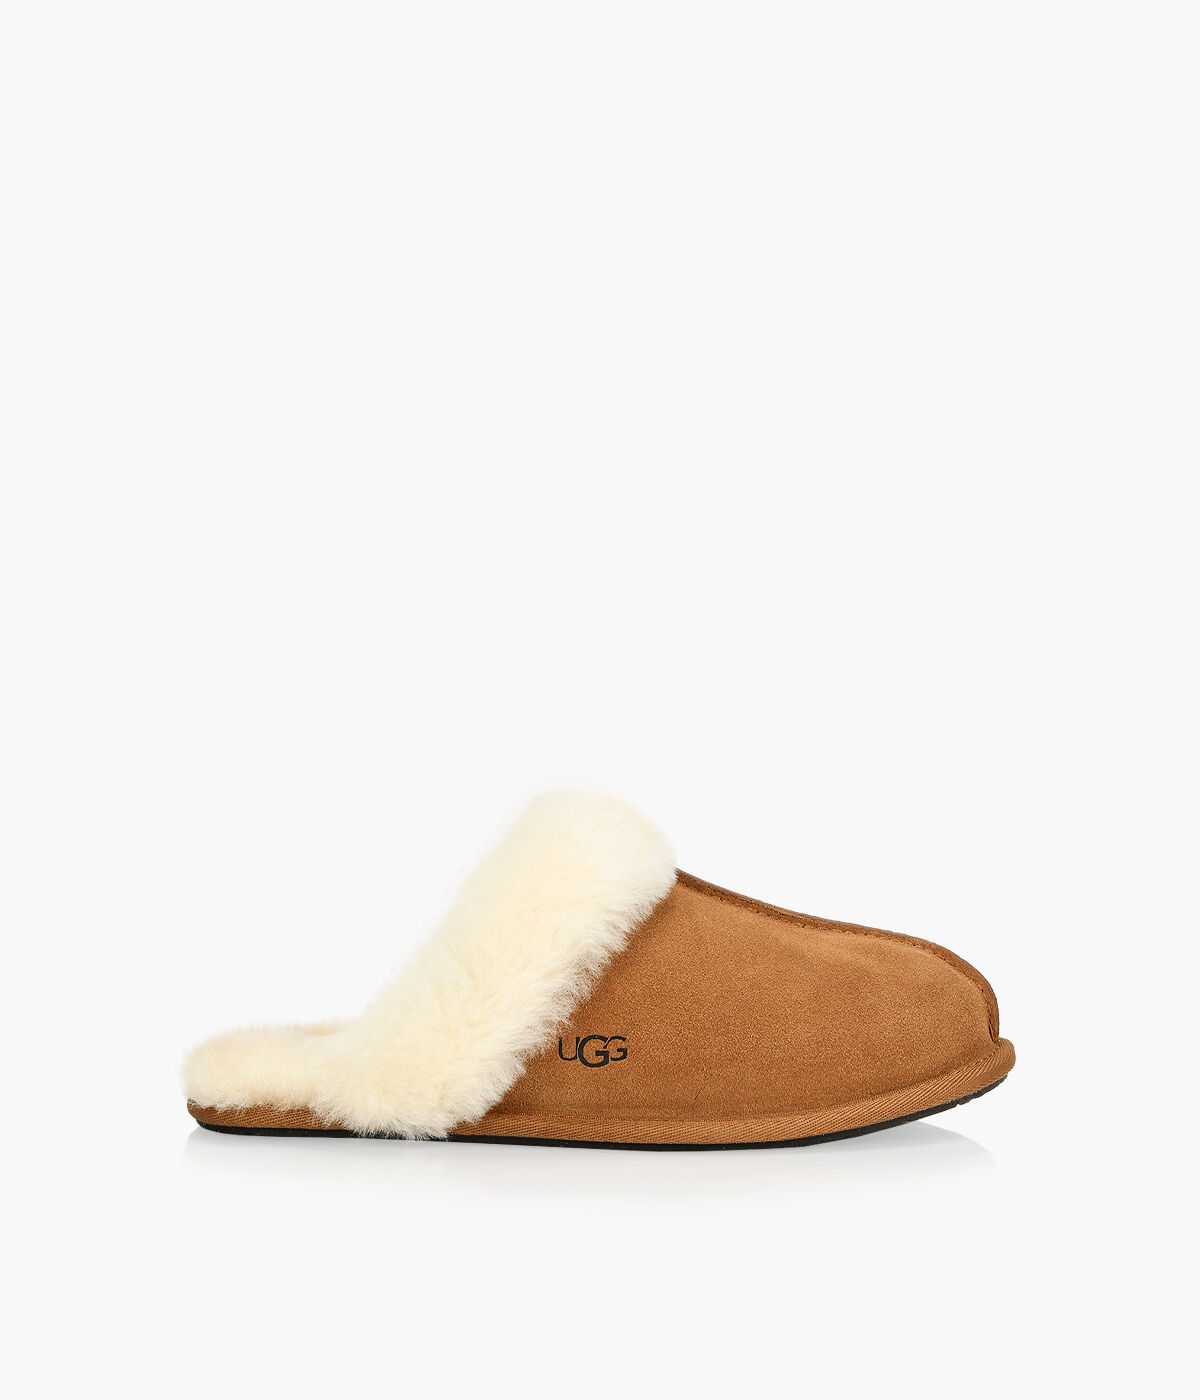 ugg slippers junior size 5